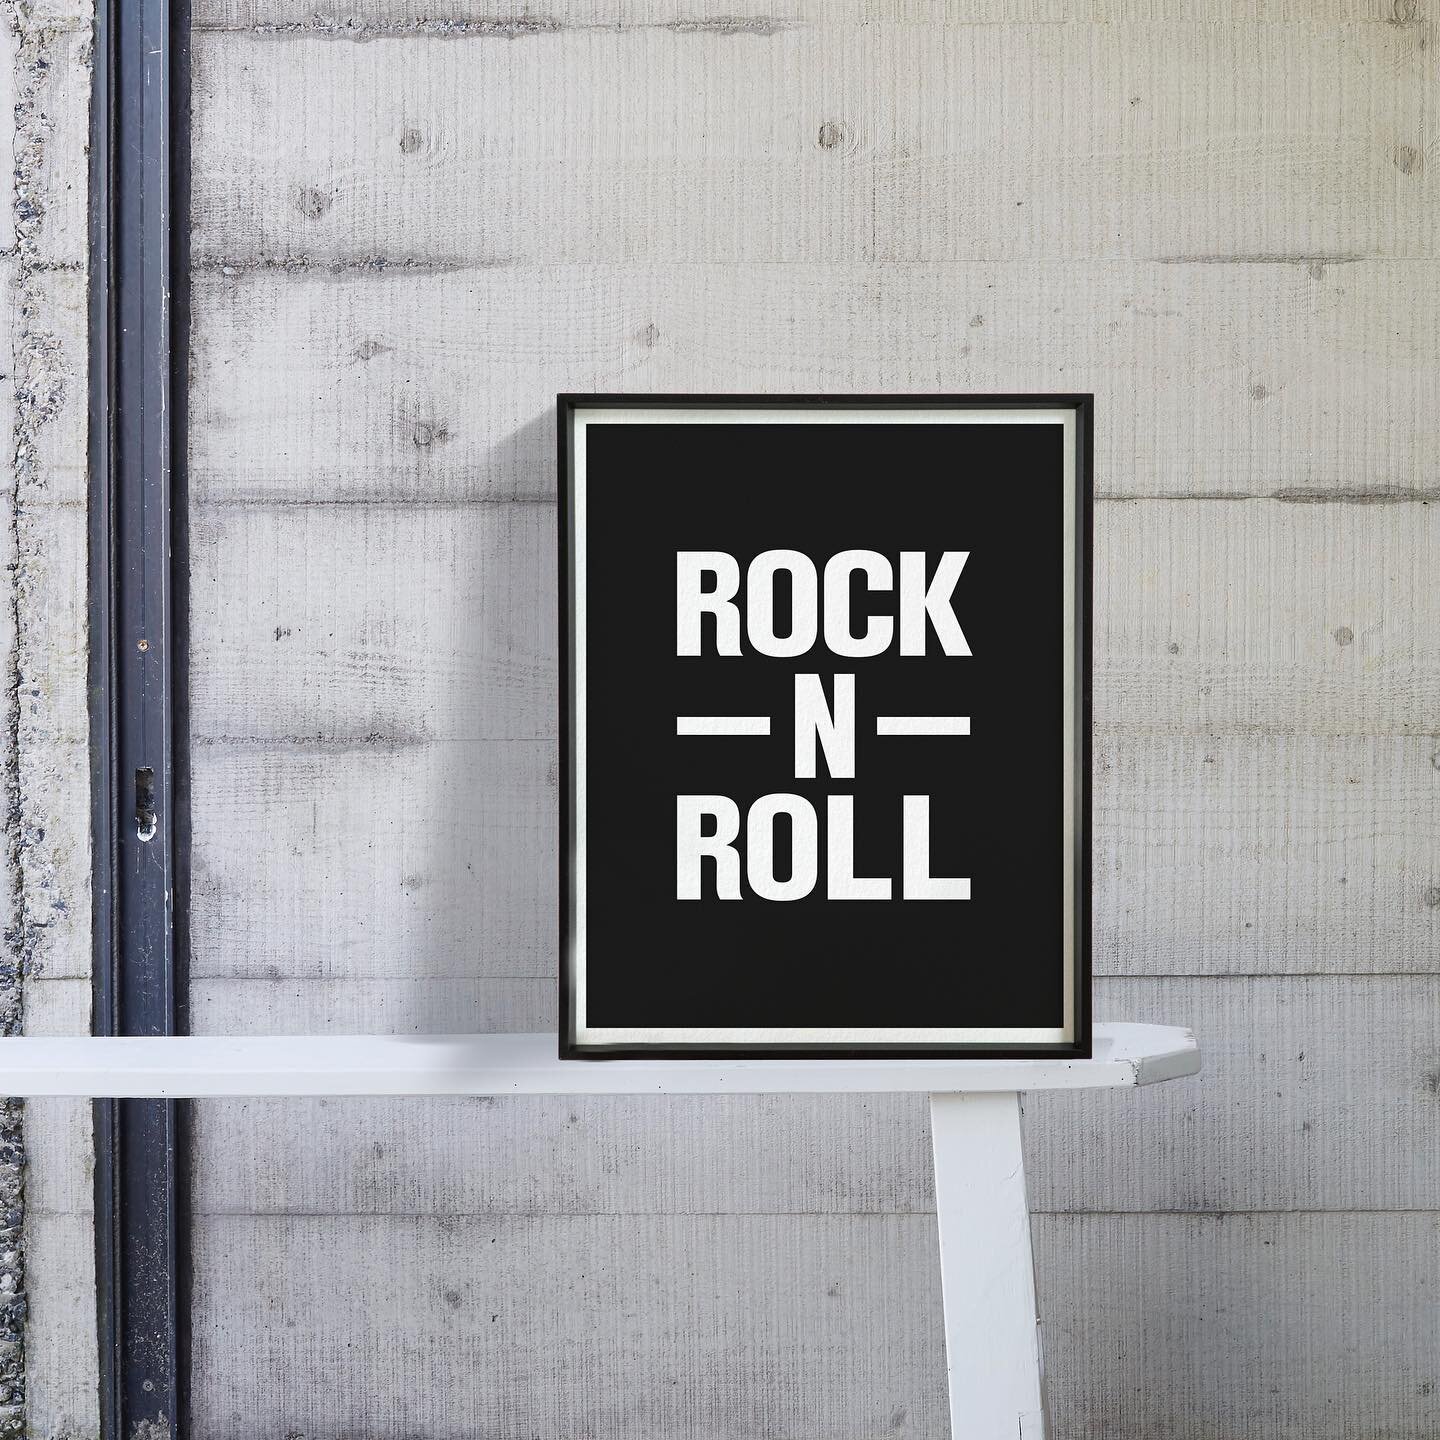 Rock on! New print available on our site. #wallart #print  #rocknroll #present #giftideas #musiclover #blackandwhite #minimalism #interiorstyling